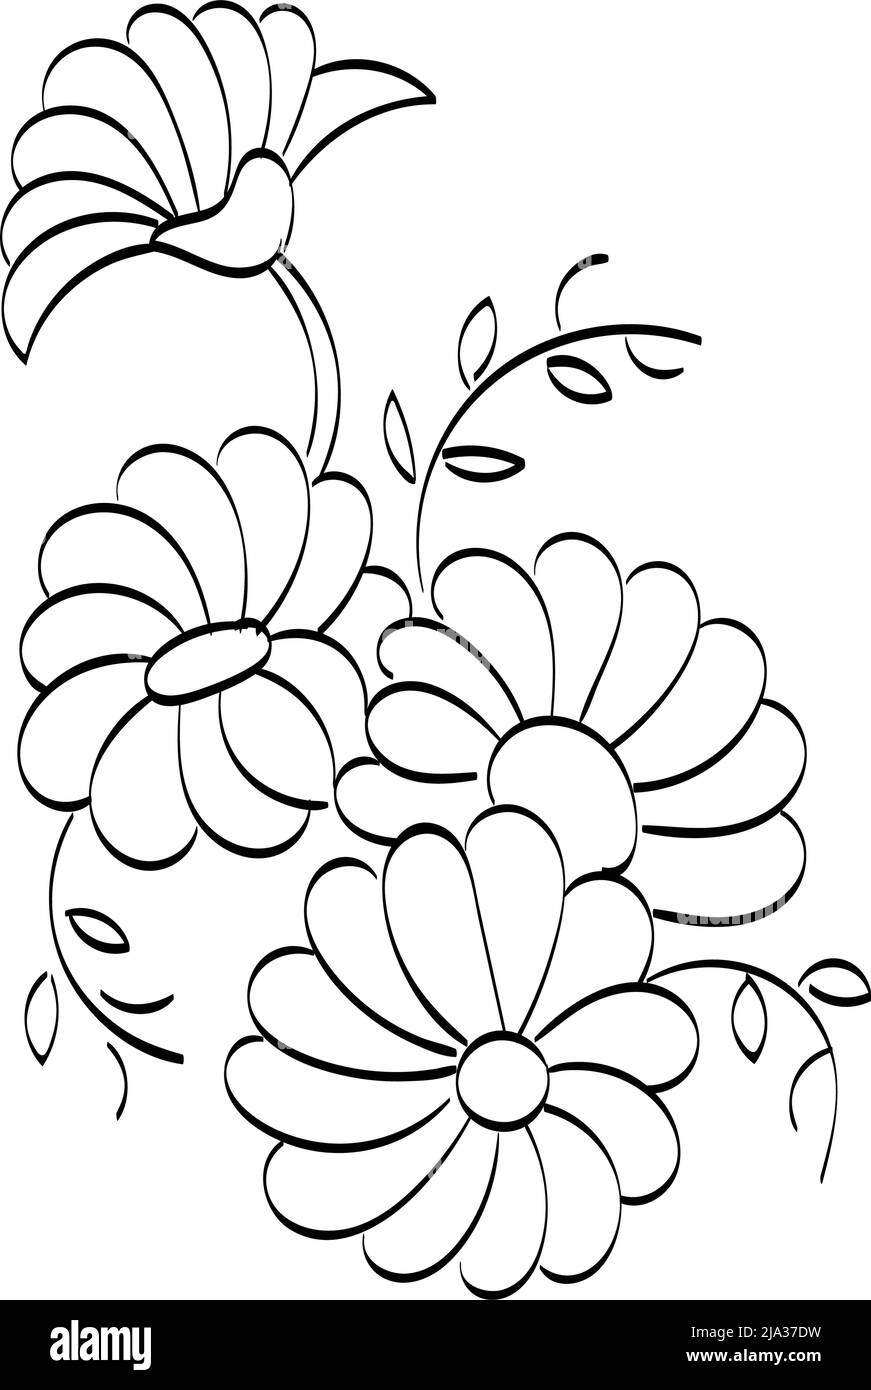 Easy floral embroidery design  Simple flower embroidery designs, Hand  embroidery patterns free, Hand embroidery design patterns